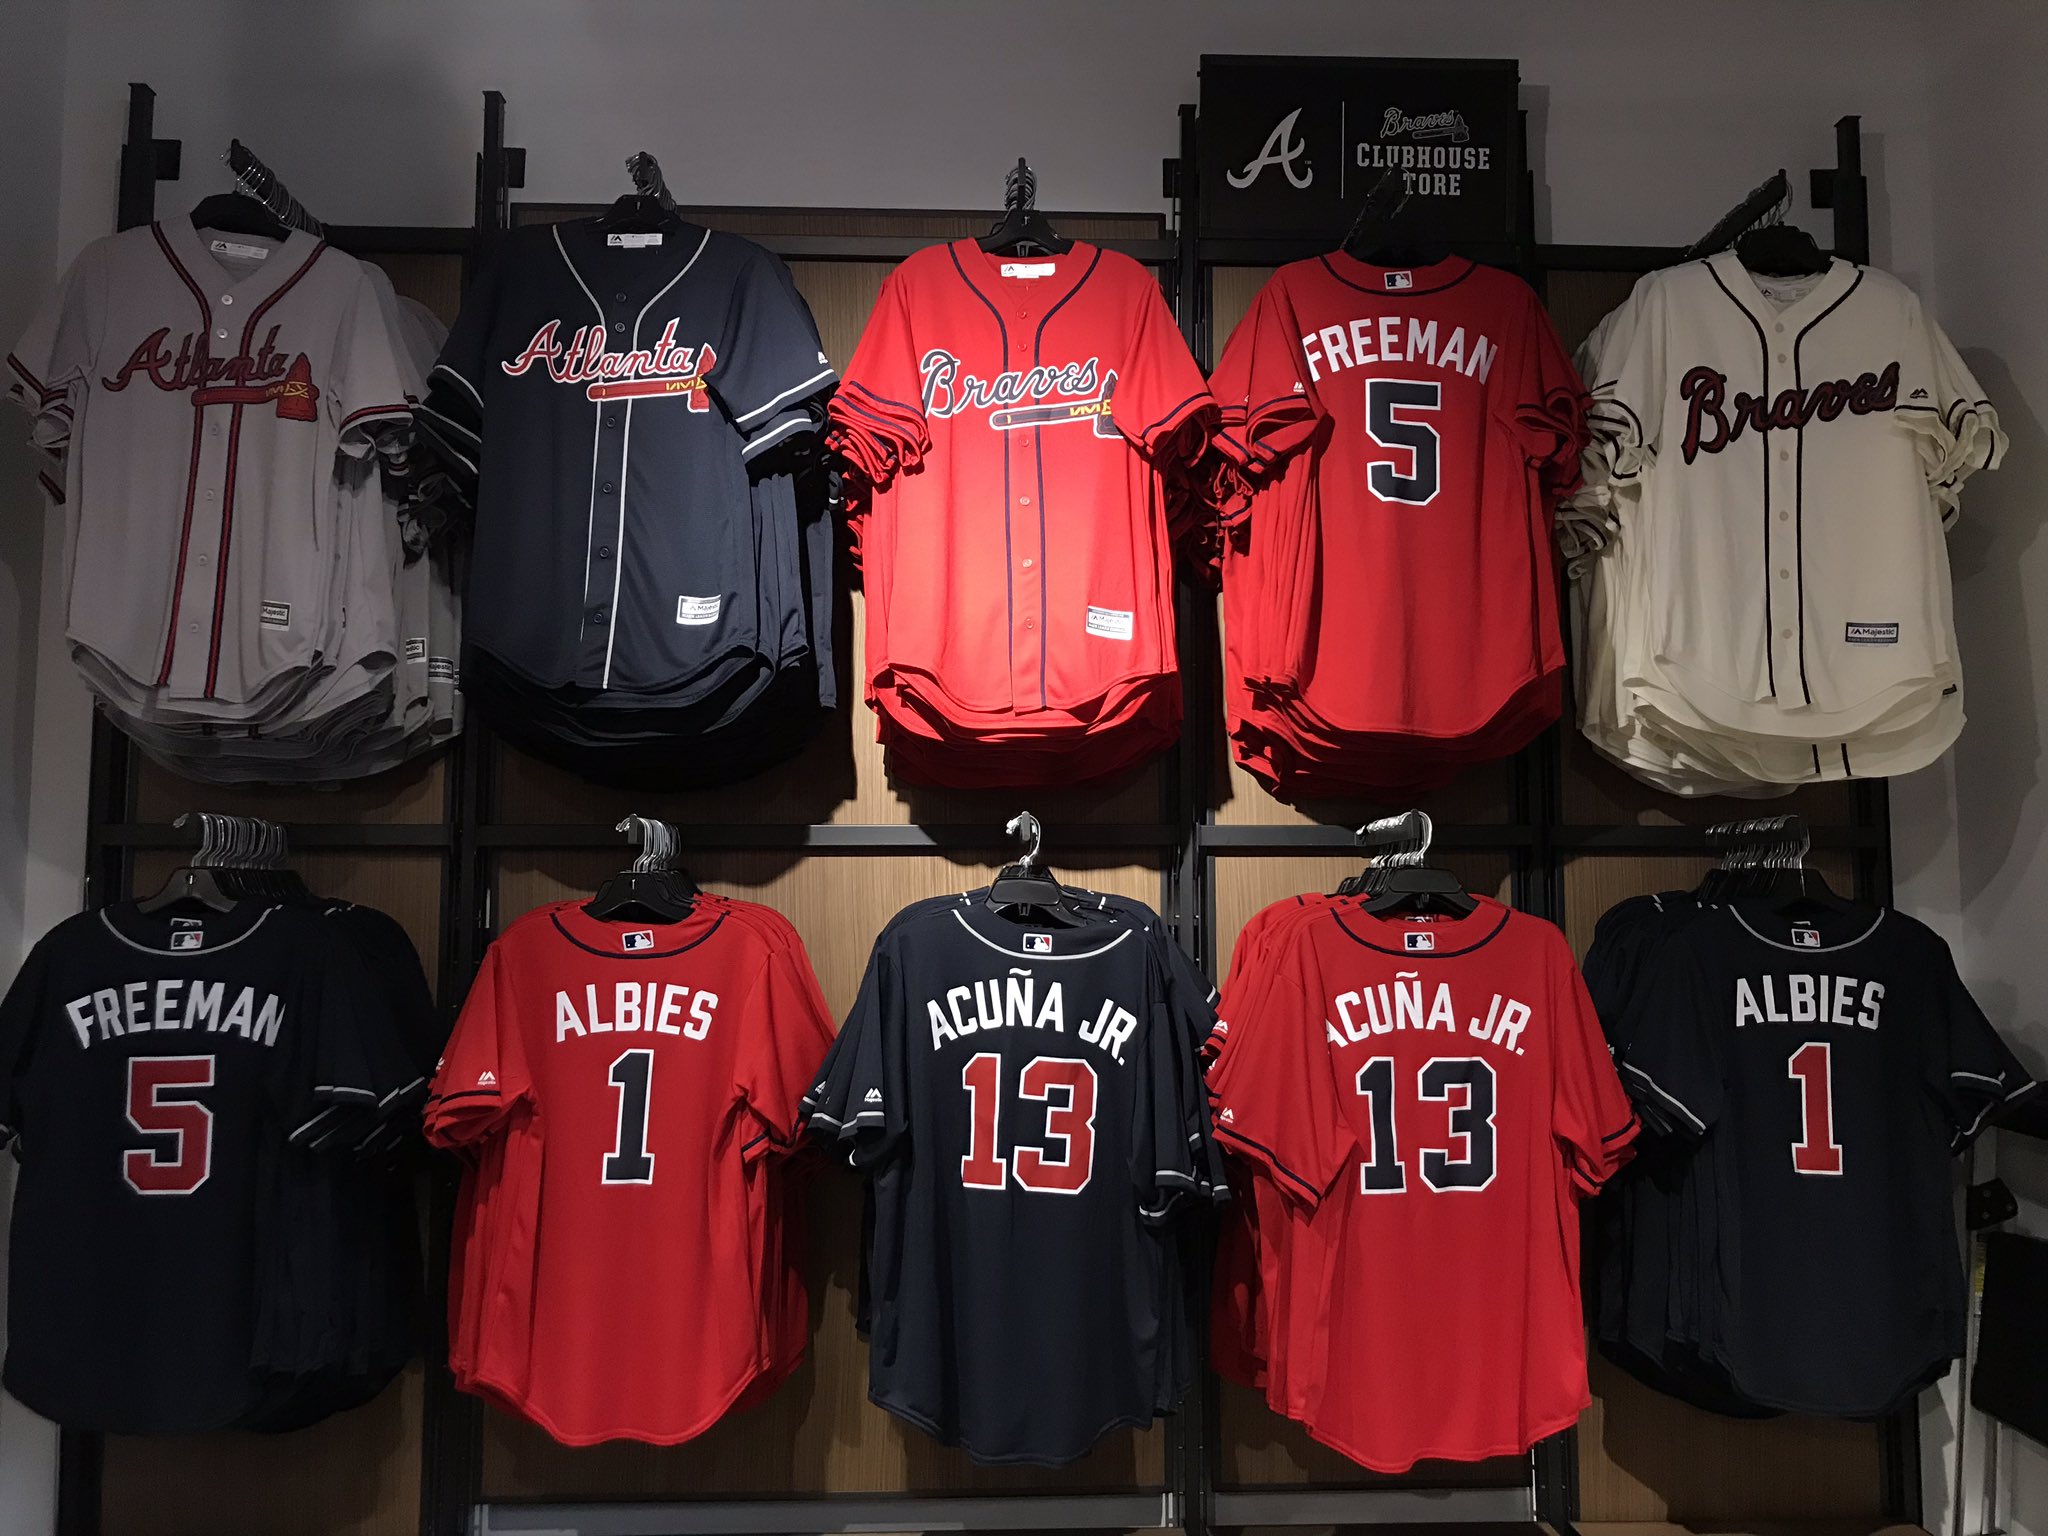 Braves Retail on X: 🚨NEW 2019 @Braves Jerseys are now available at the @ Braves Clubhouse Store! 🚨  / X